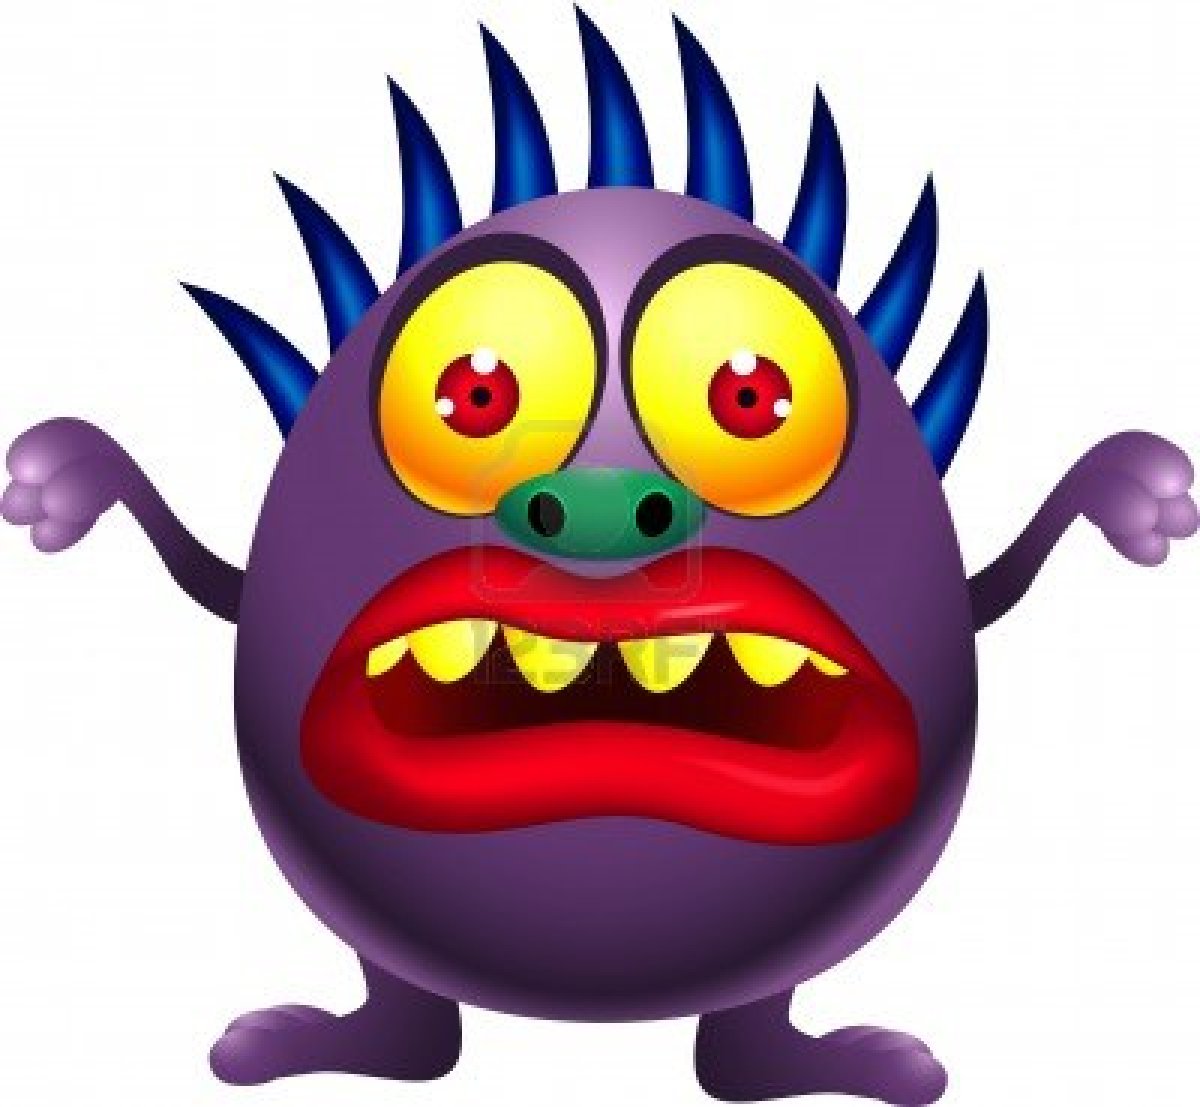 Scary Cartoon Monsters Images & Pictures - Becuo